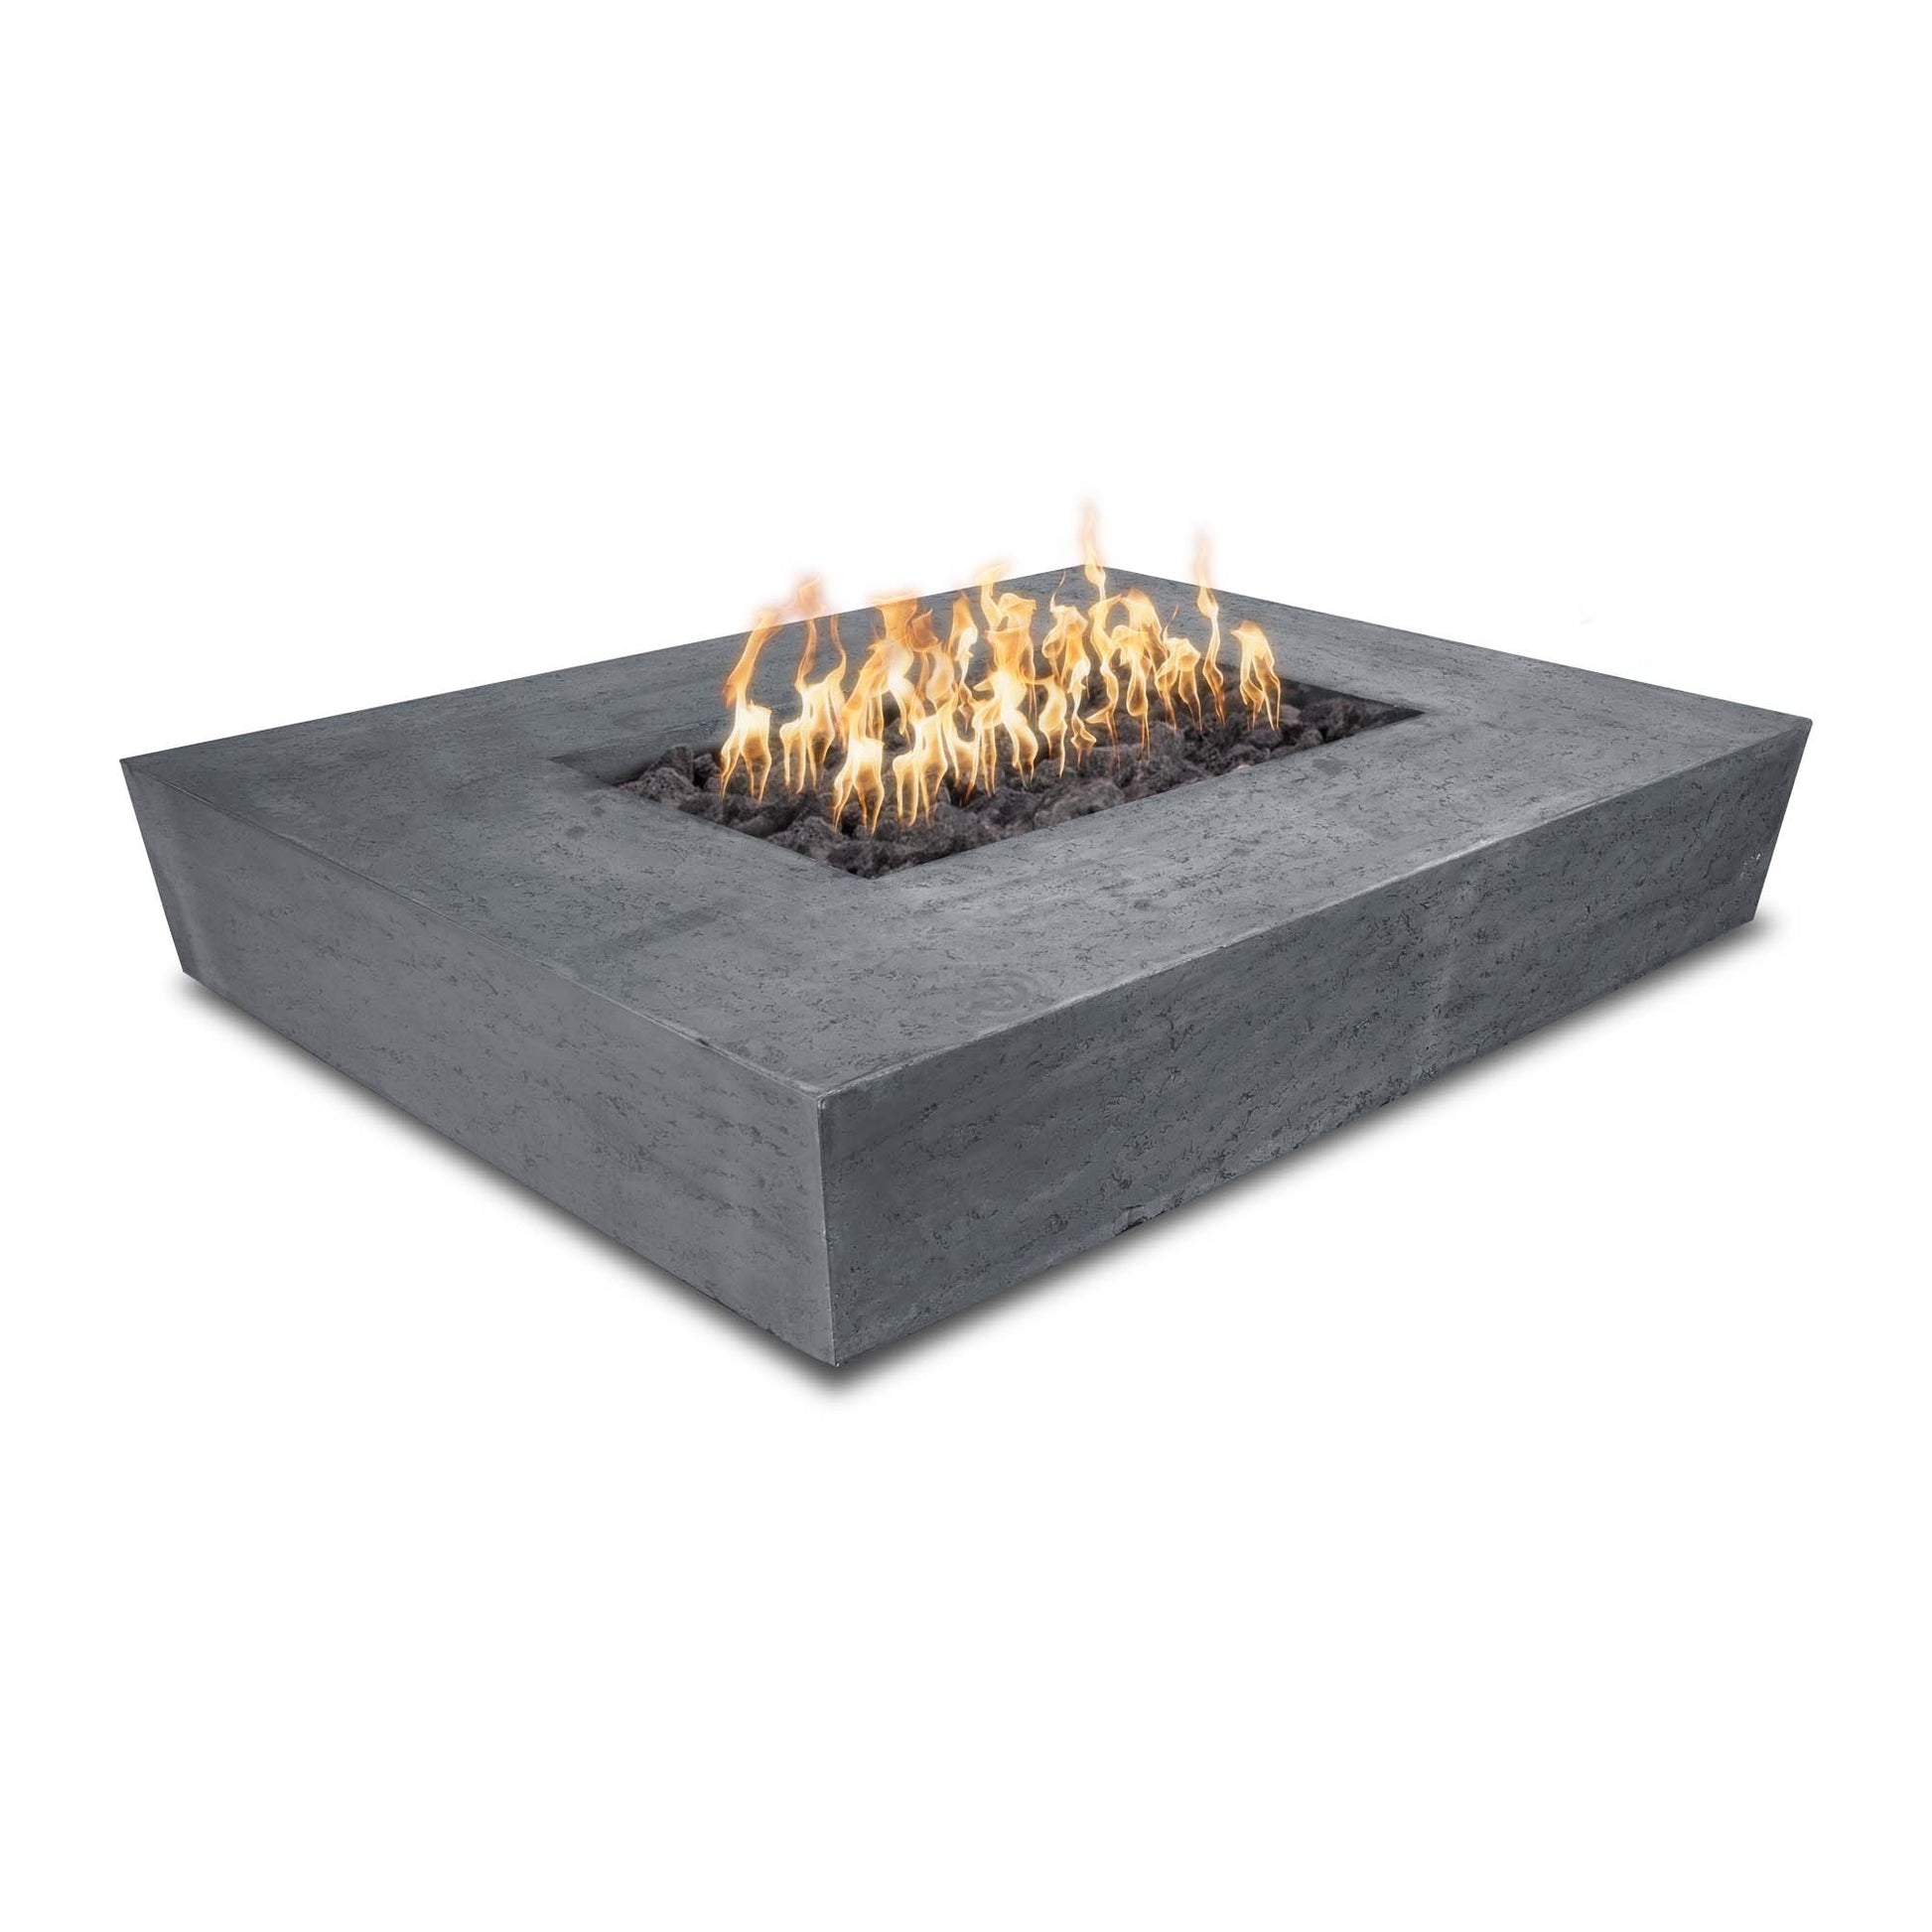 The Outdoor Plus Rectangular Heiko 58" Metallic Bronze GFRC Concrete Natural Gas Fire Pit with Match Lit Ignition